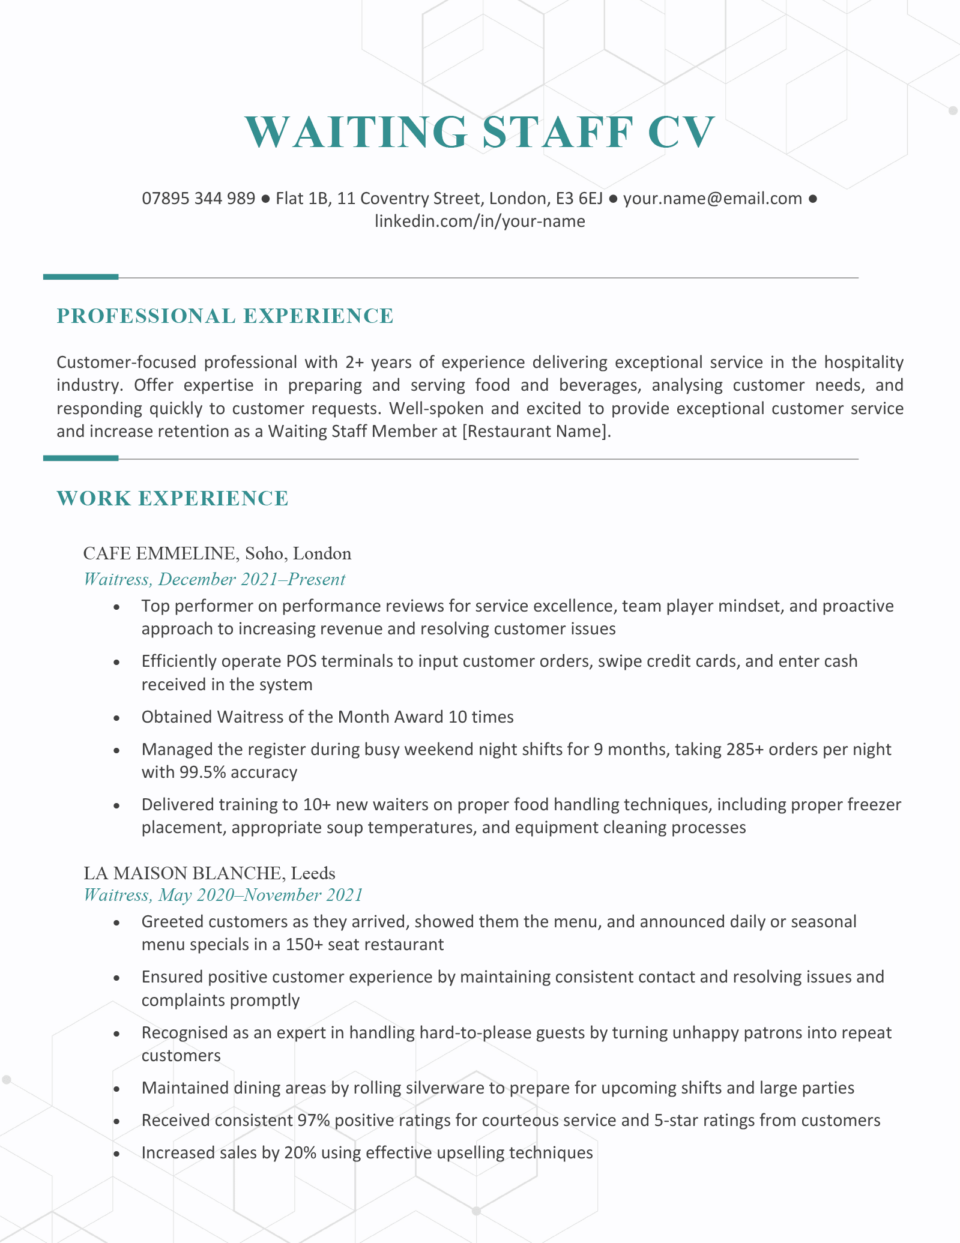 An example of a waiter or waitress CV on a template with blue font to accentuate each of the CV's headings.